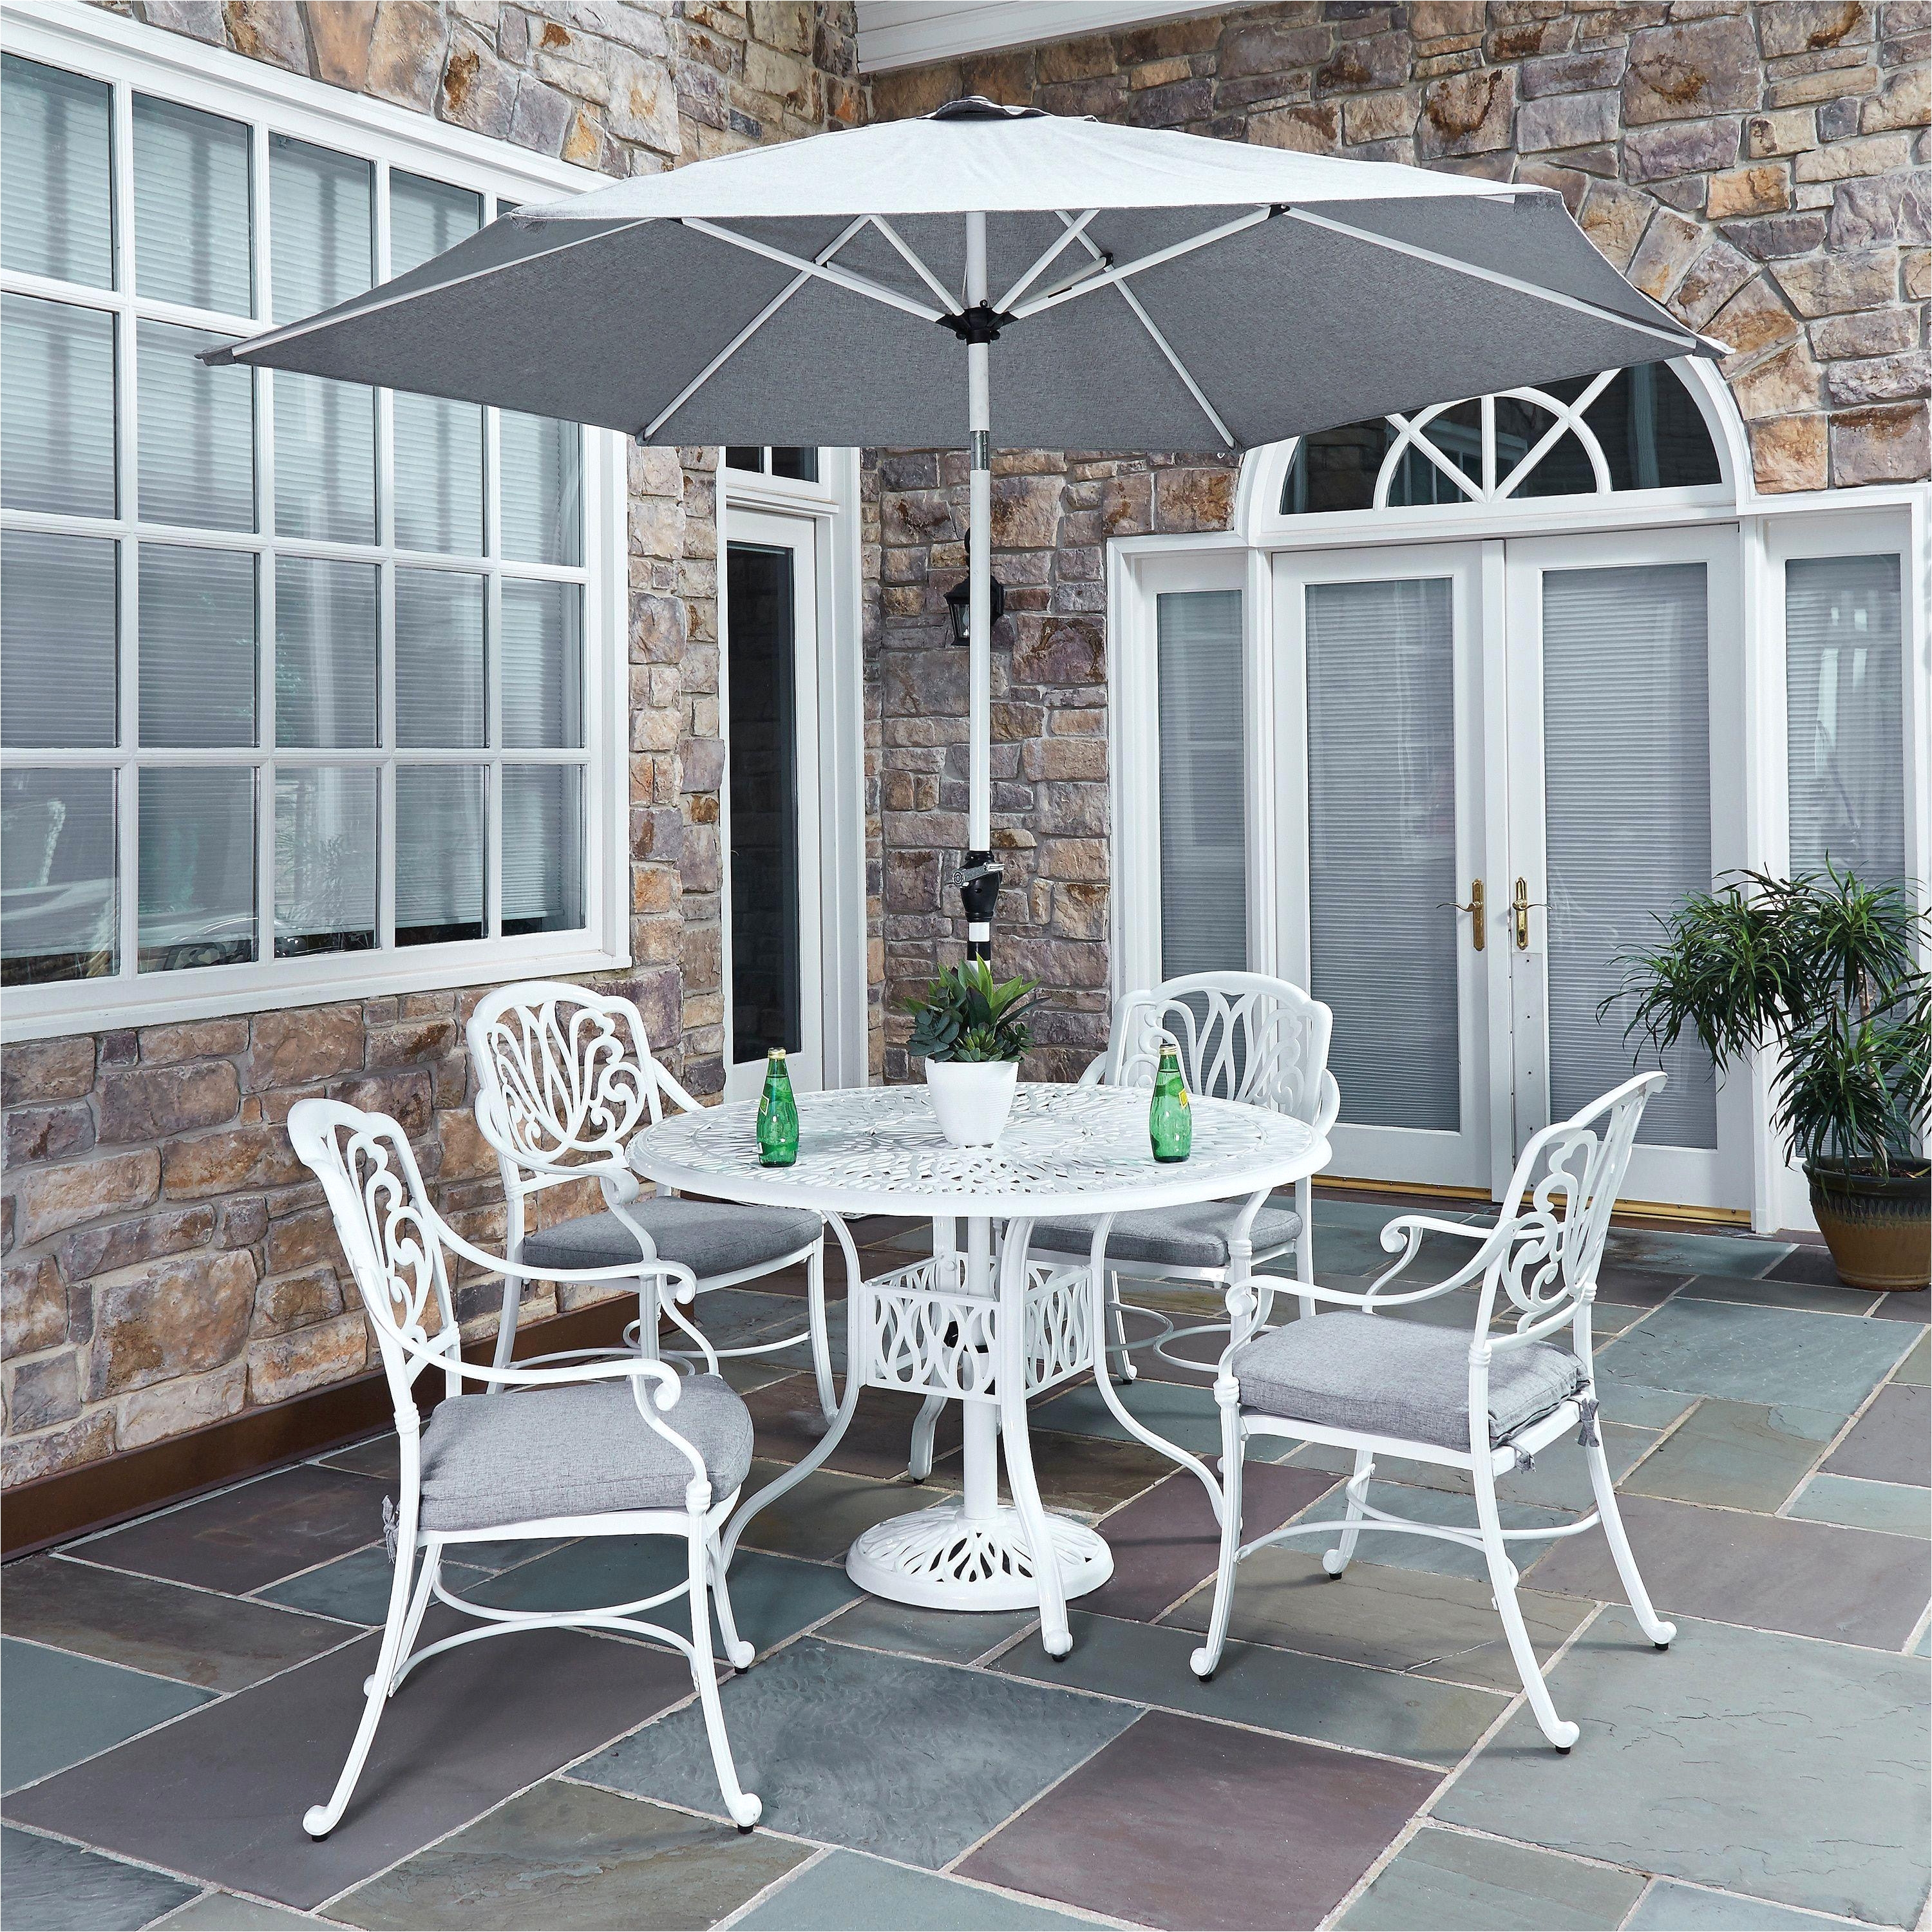 used outdoor furniture best of used cast aluminum patio furniture beautiful patio furniture 0d tags